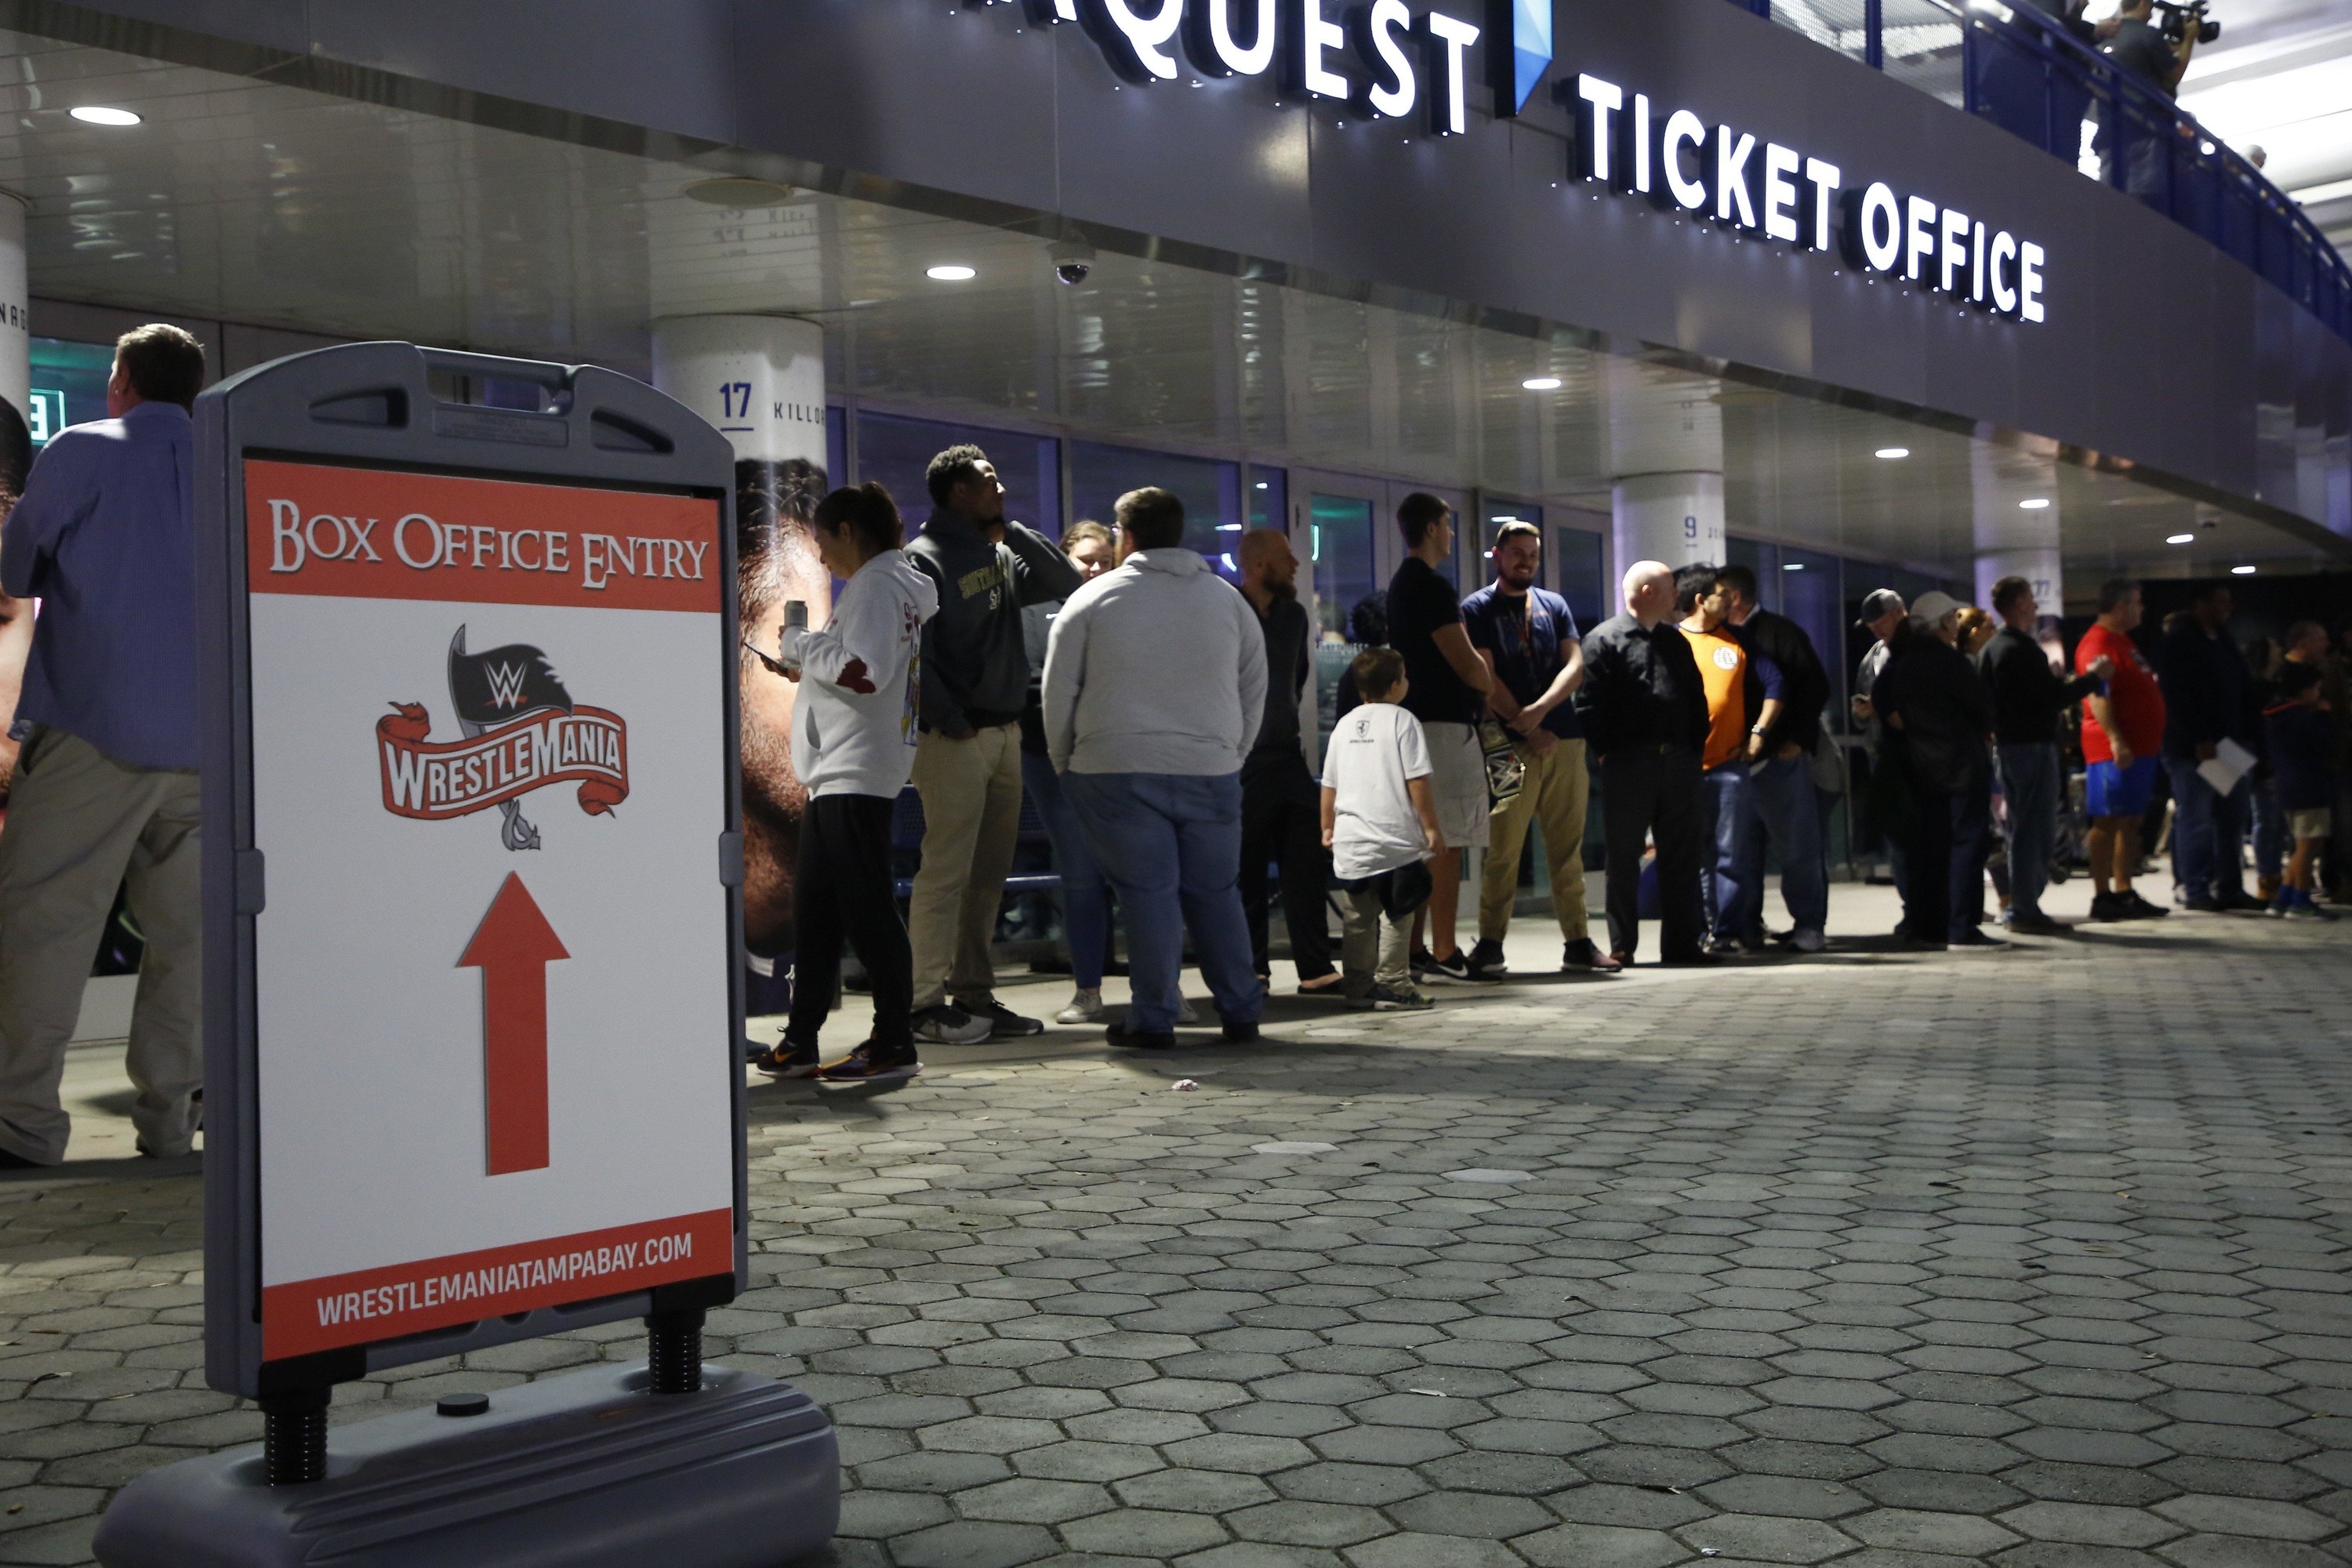 Hundreds of fans wait in line eager to purchase Wrestlemania 36 tickets a day before they go on sale to the general public at Amalie Arena in November 2019